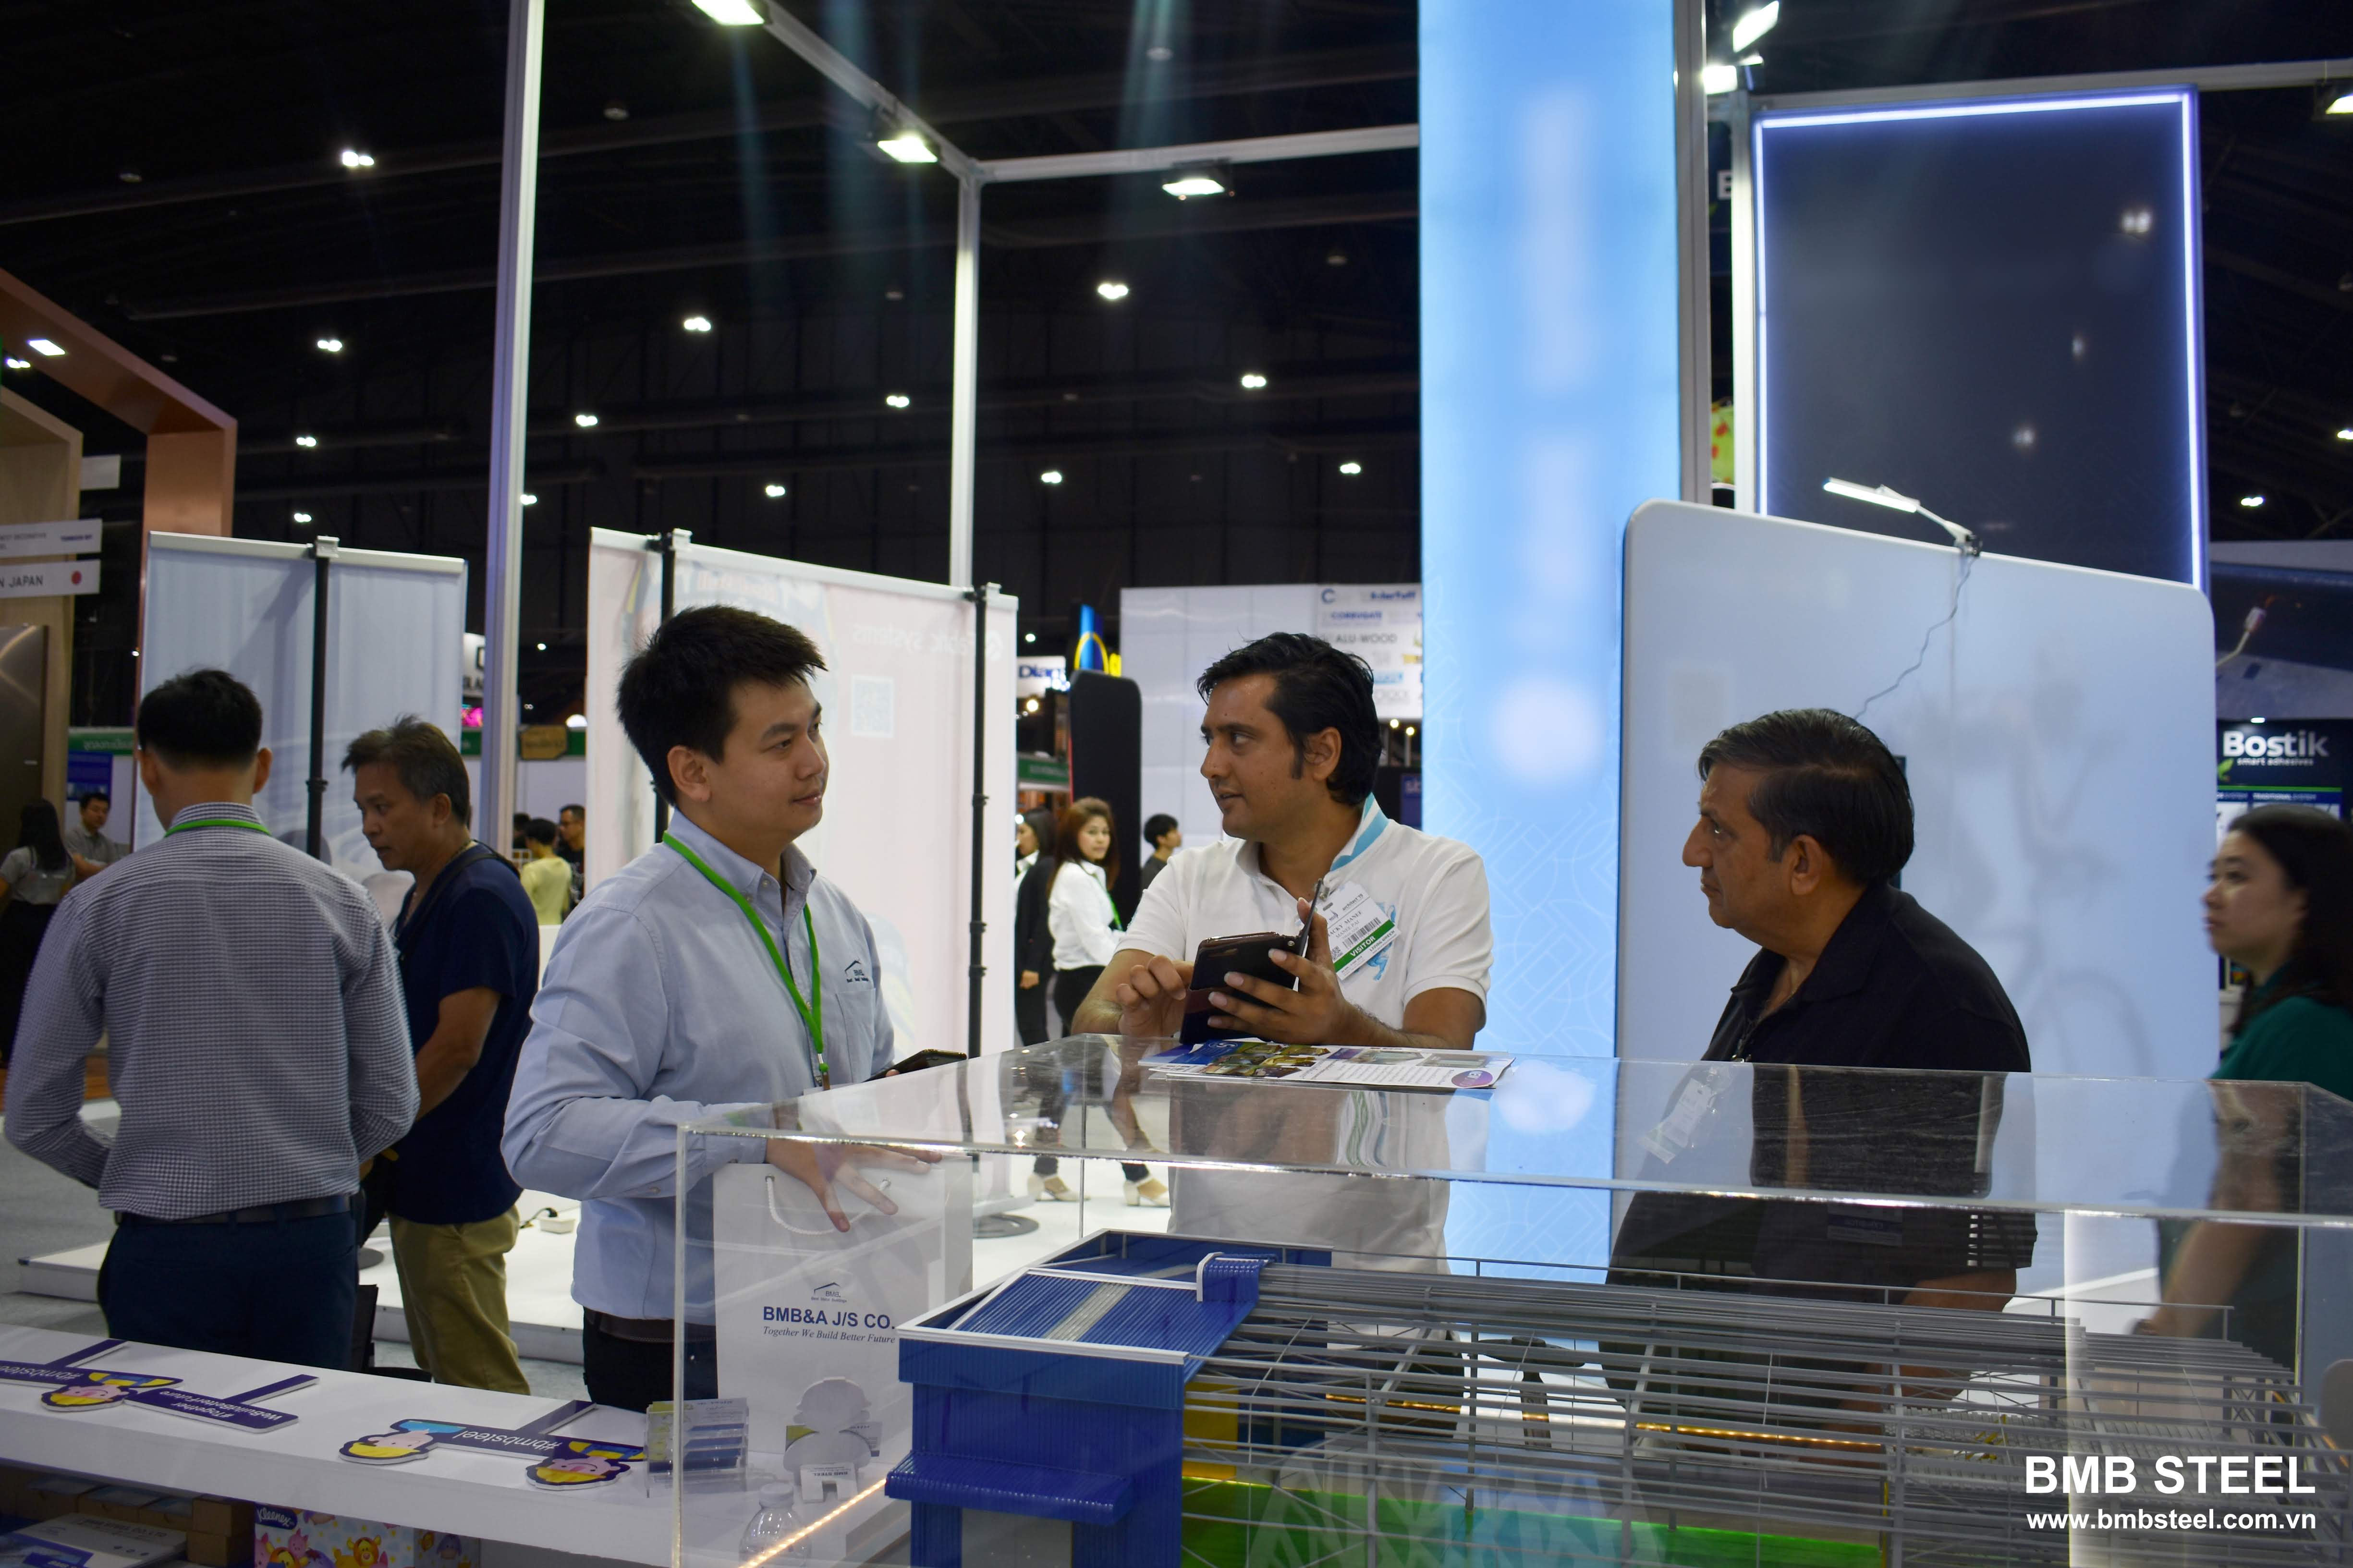 BMB Steel participated in Thai Architect'19 expo in Thailand 5